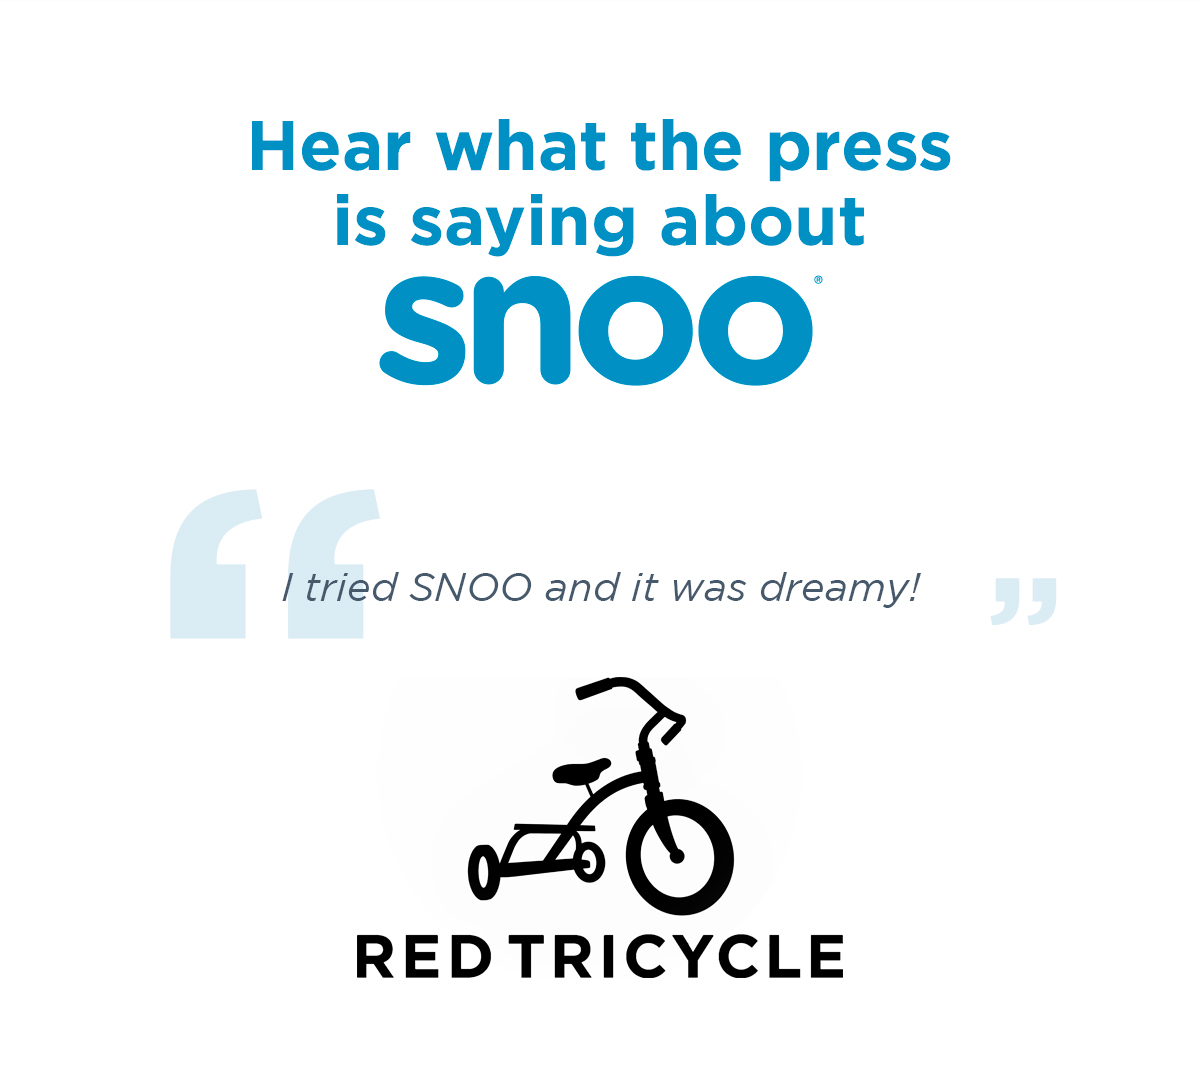 Hear what the press is saying about SMOO: ''I tried SNOO and it was dreamy!'' - Red Tricycle